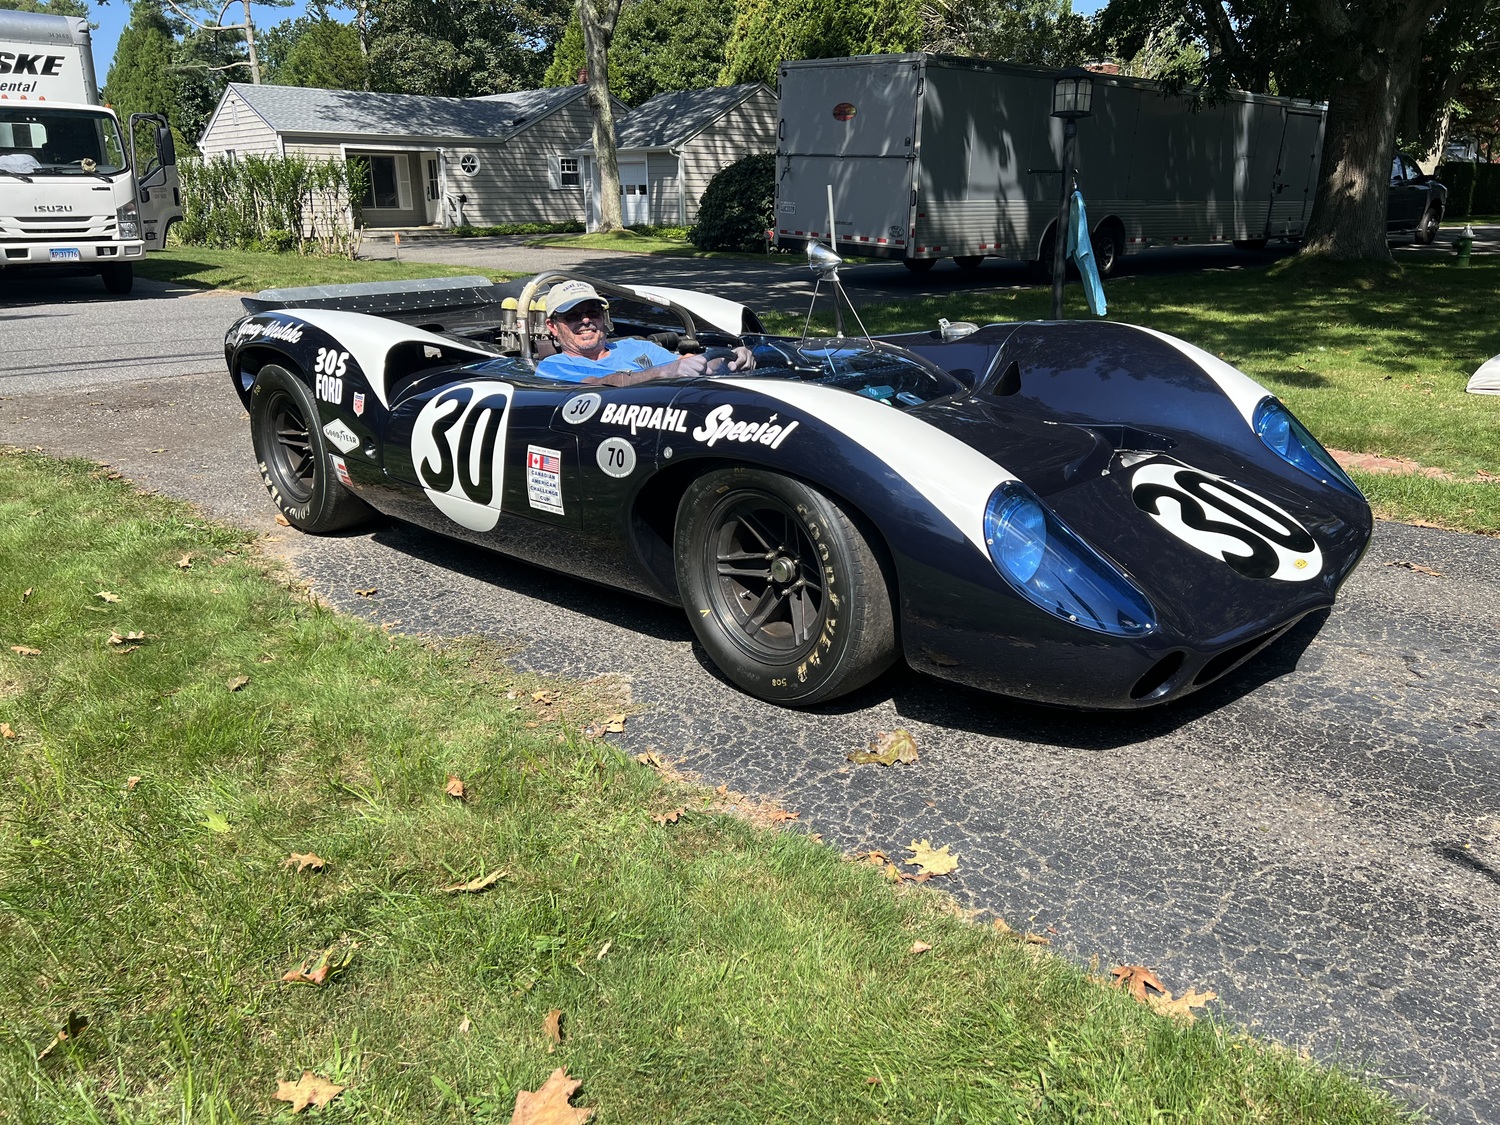 The Lola T70 was brought out of retirement to serve as the pace car at the 2018 24 Hours of Daytona. COURTESY JOHAN WOERHEIDE